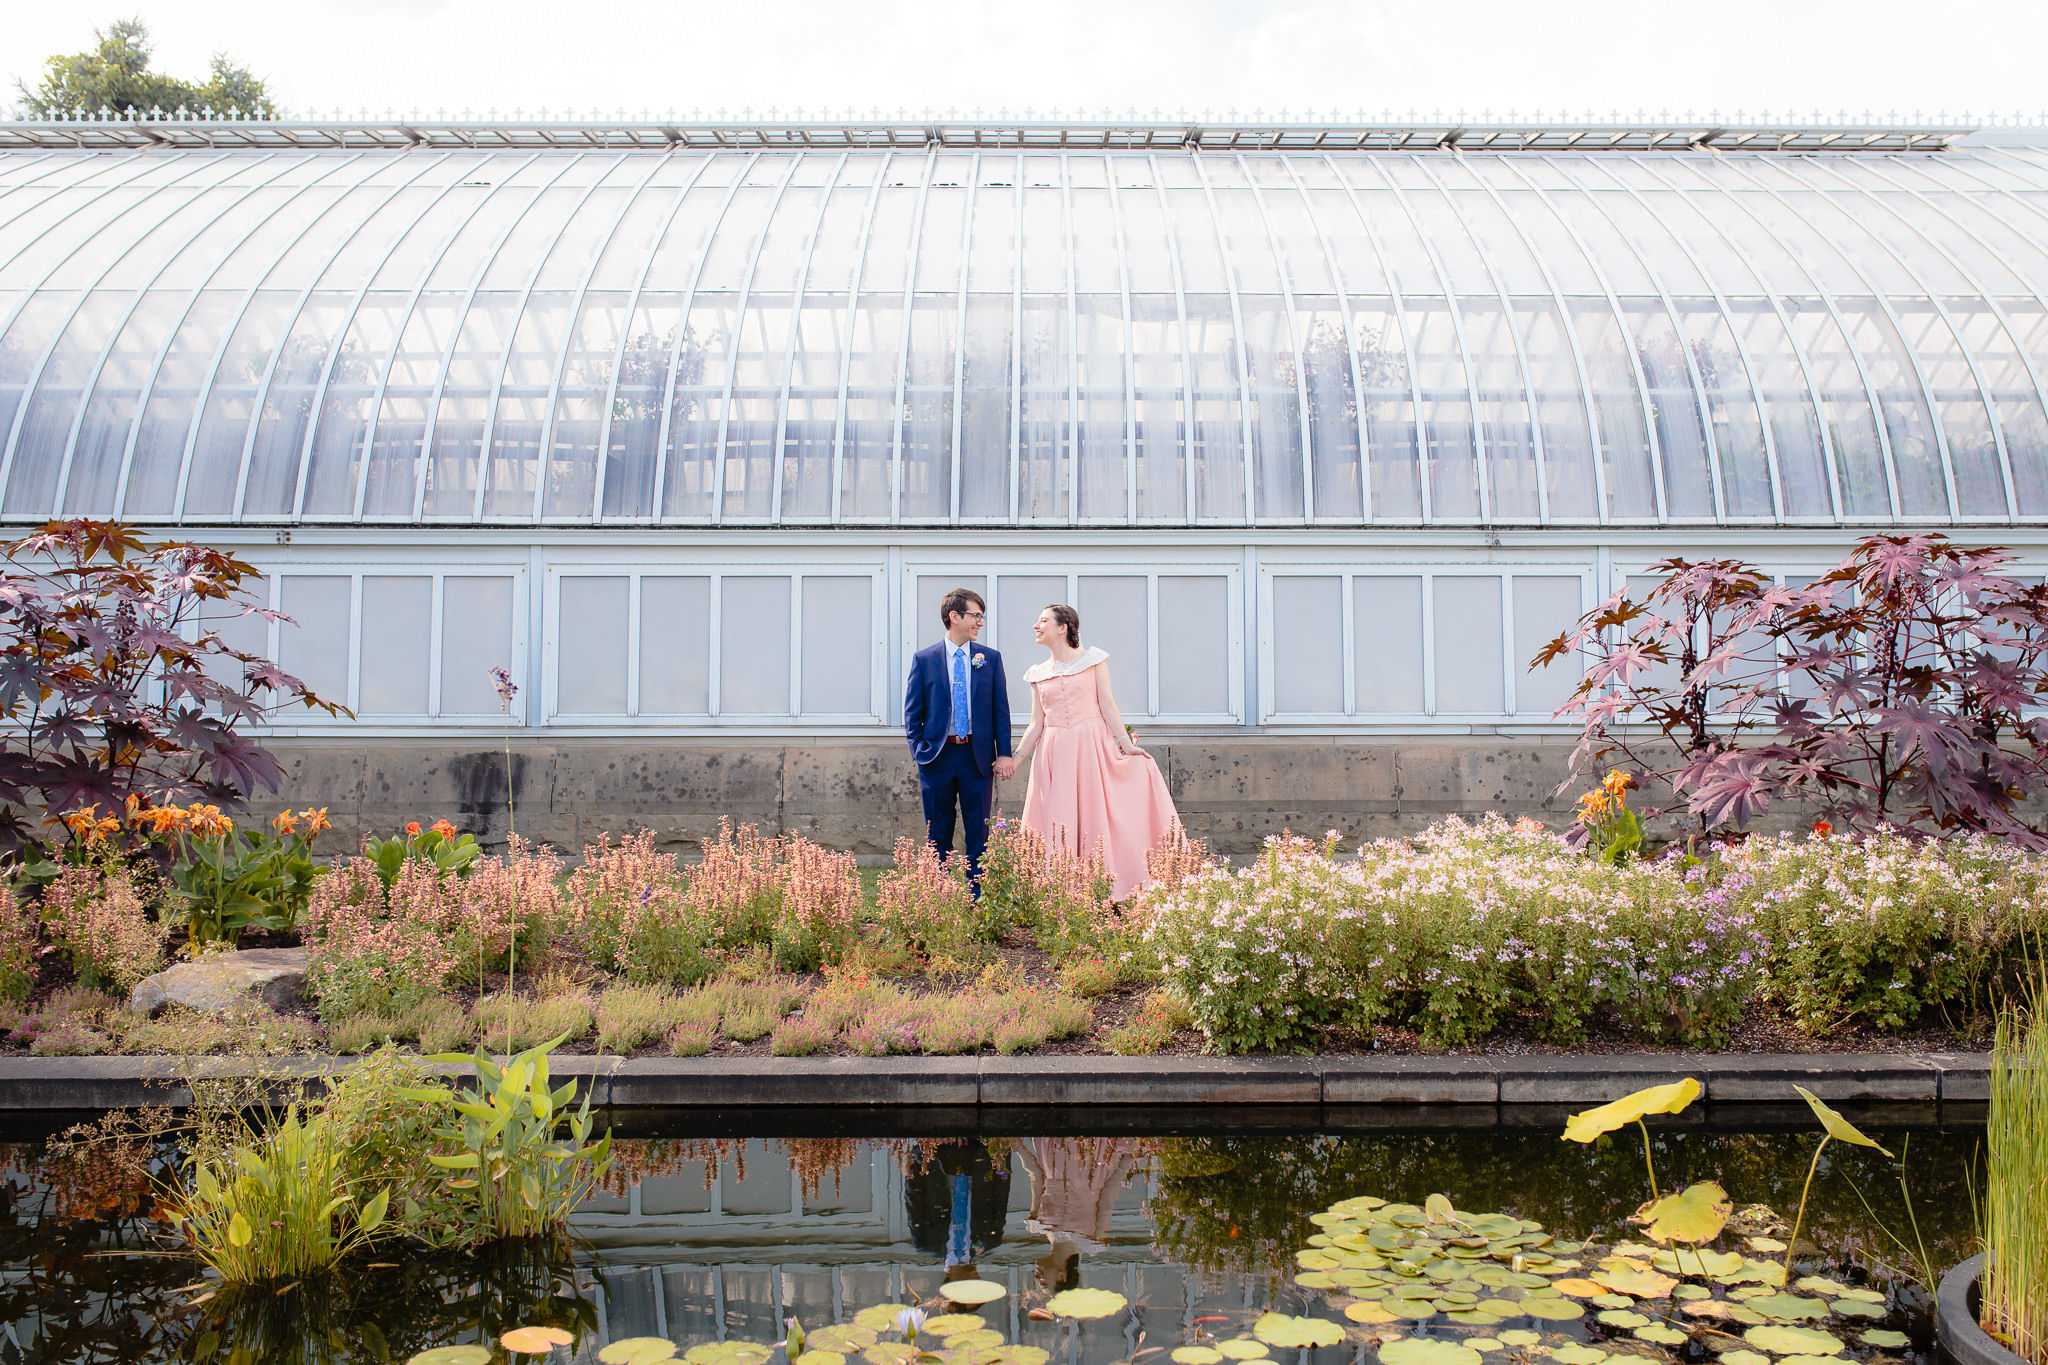 Bride & groom's reflection shows in the pond at Phipps